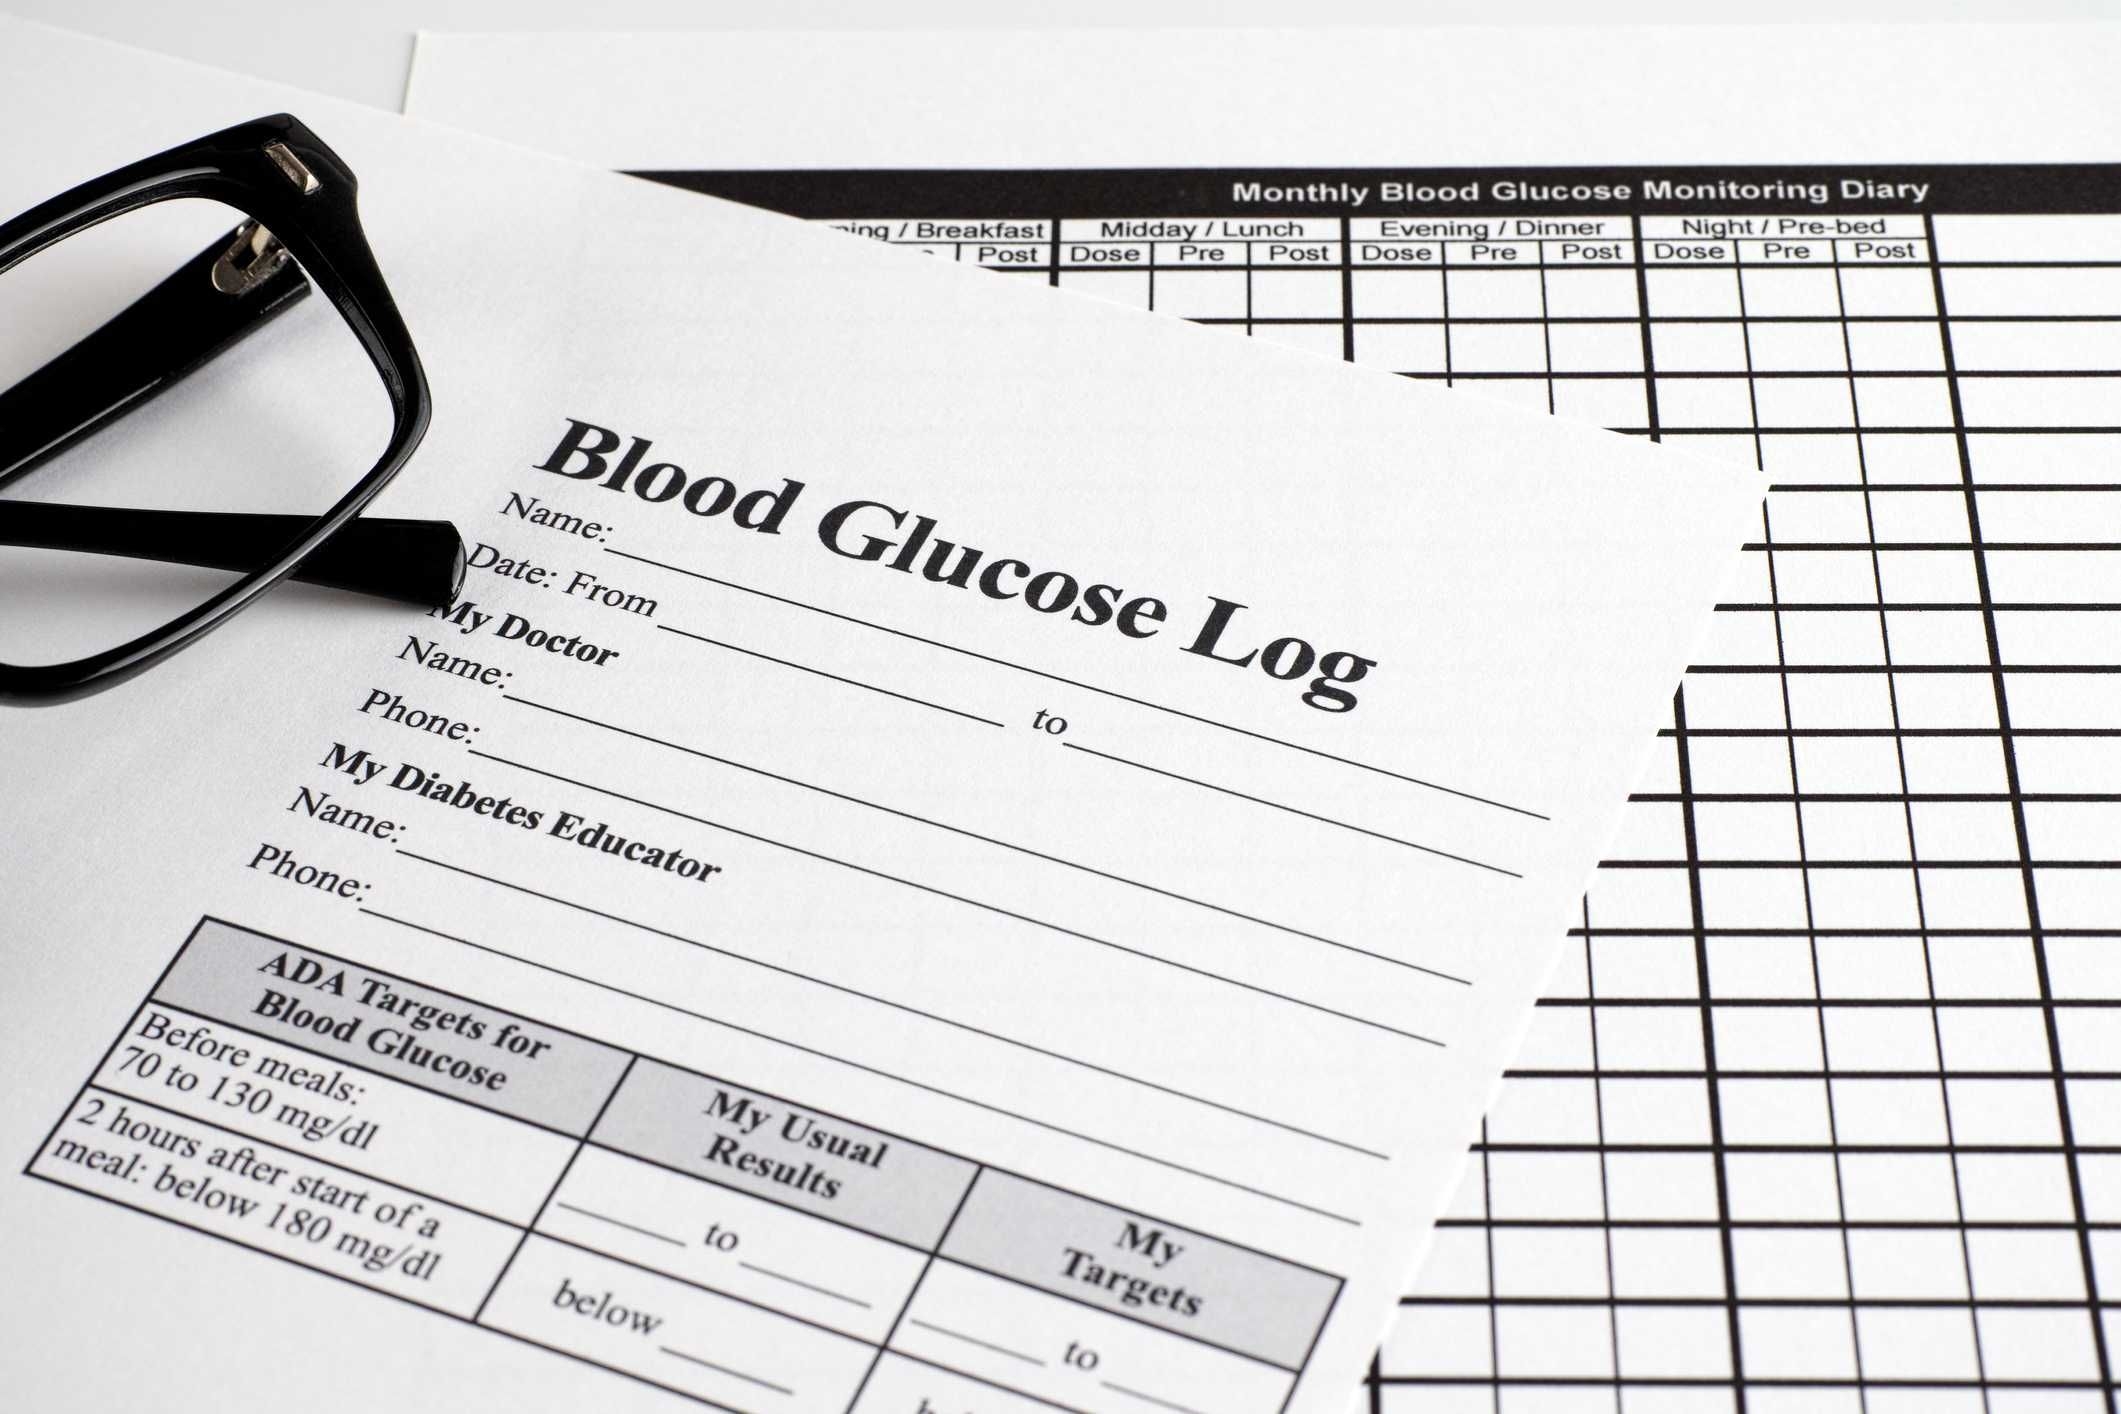 Blood Glucose Diaries - Free Blood Glucose Monitoring Diary